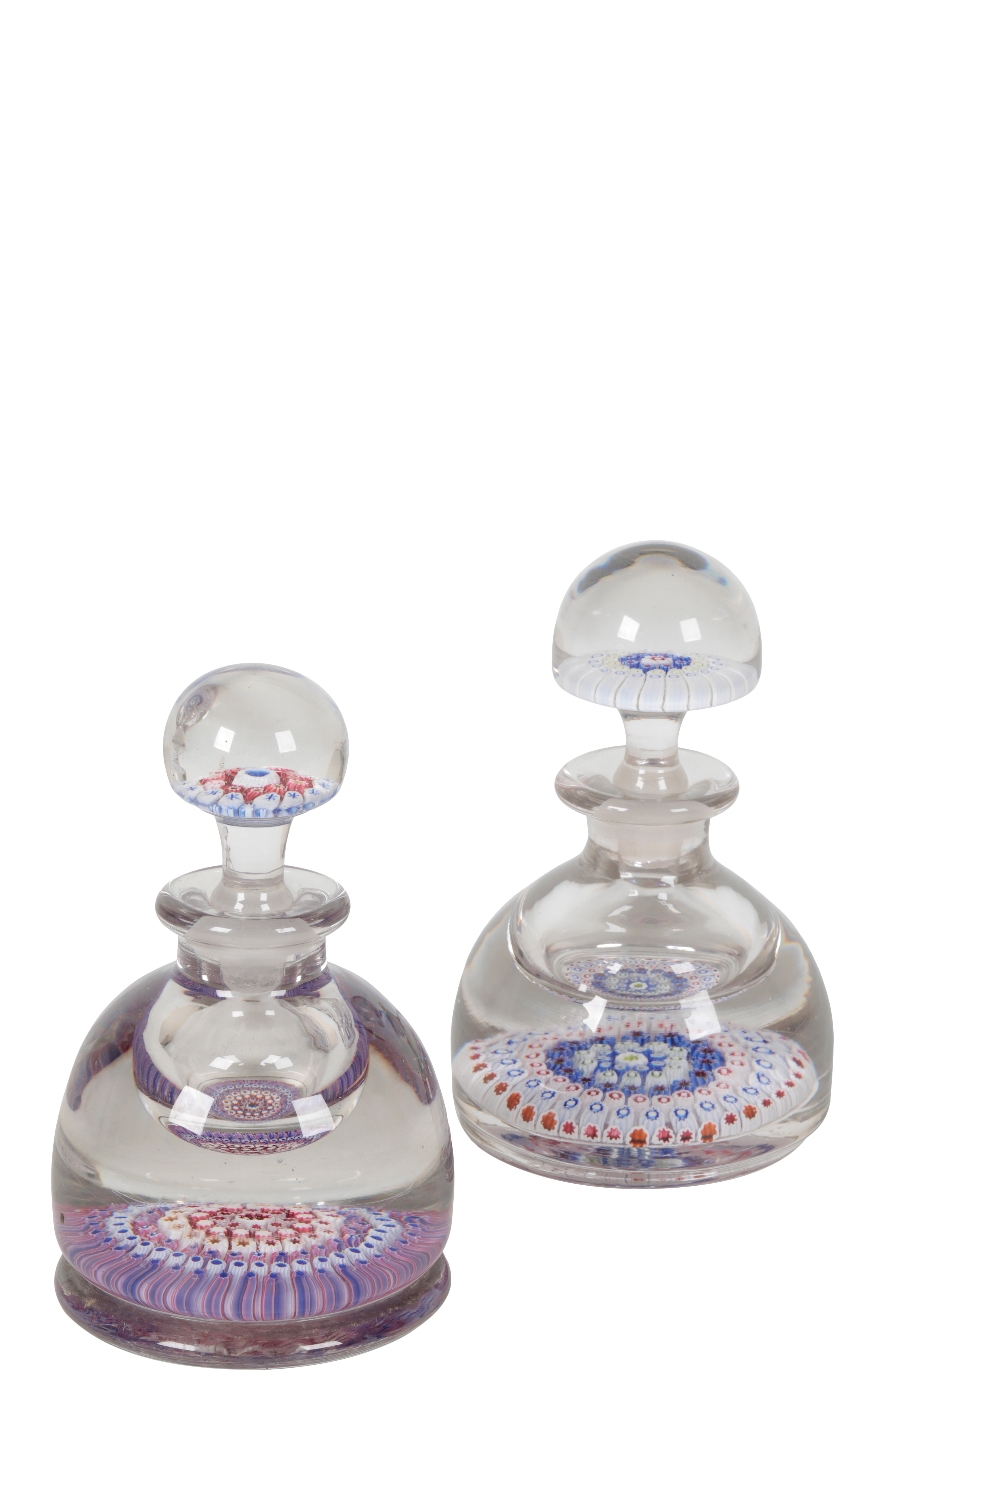 TWO MILLEFIORI GLASS INKWELL PAPERWEIGHTS